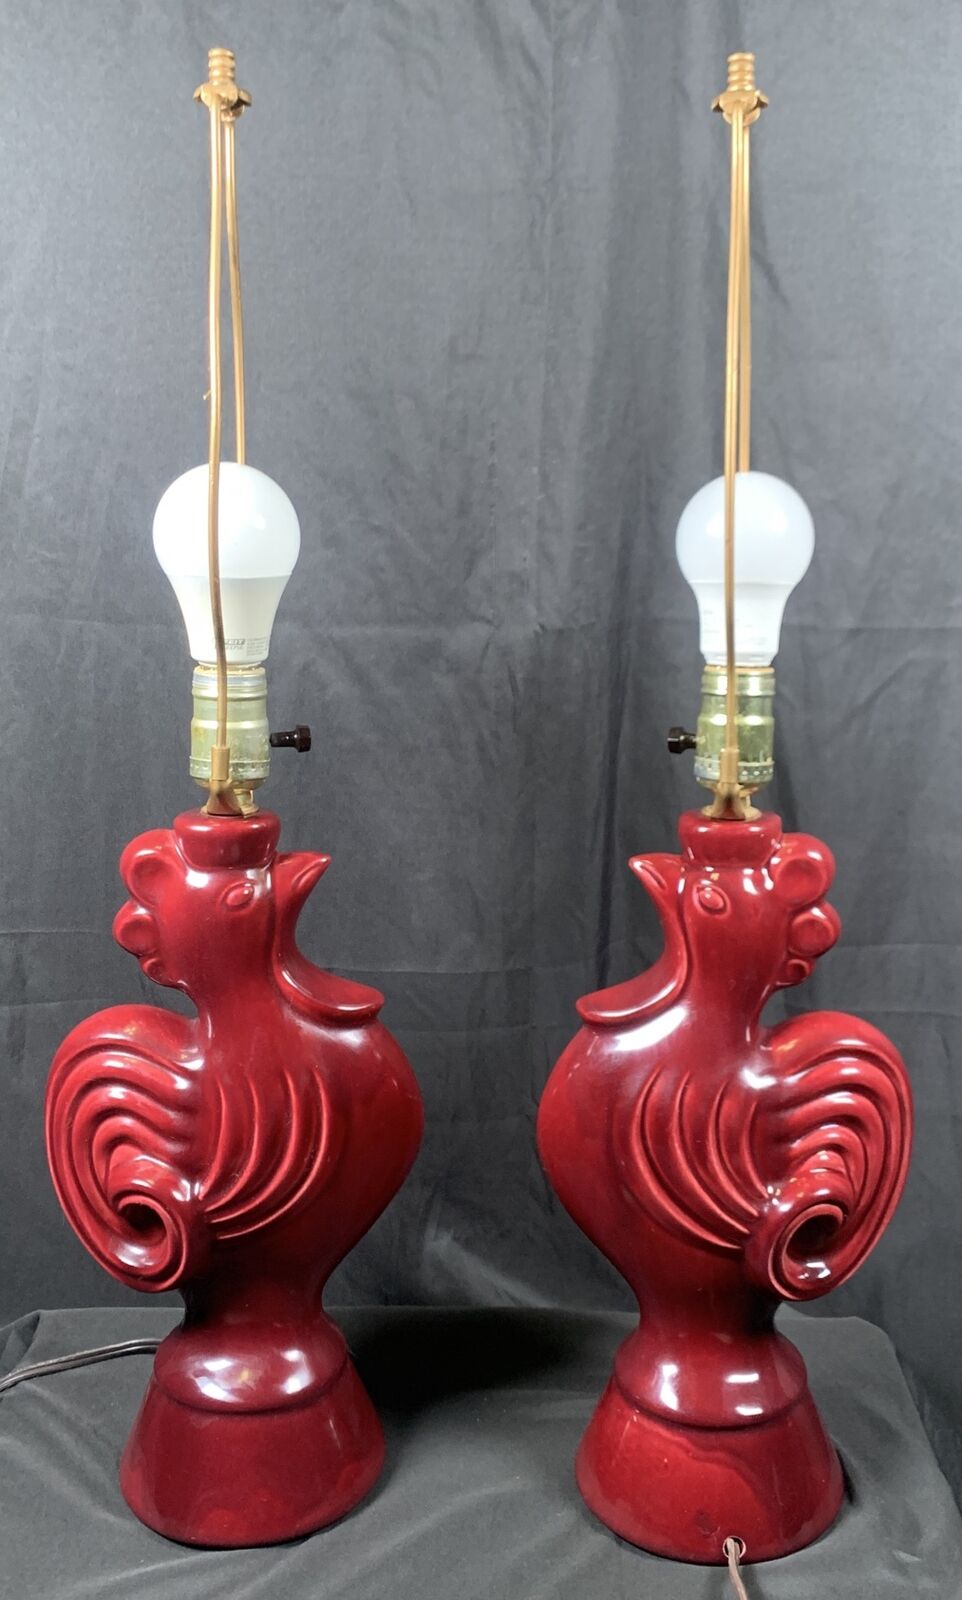 ✨Vintage Pair Of Rooster/ Chicken Lamp 25.75” French Country Farmhouse Kitchen✨